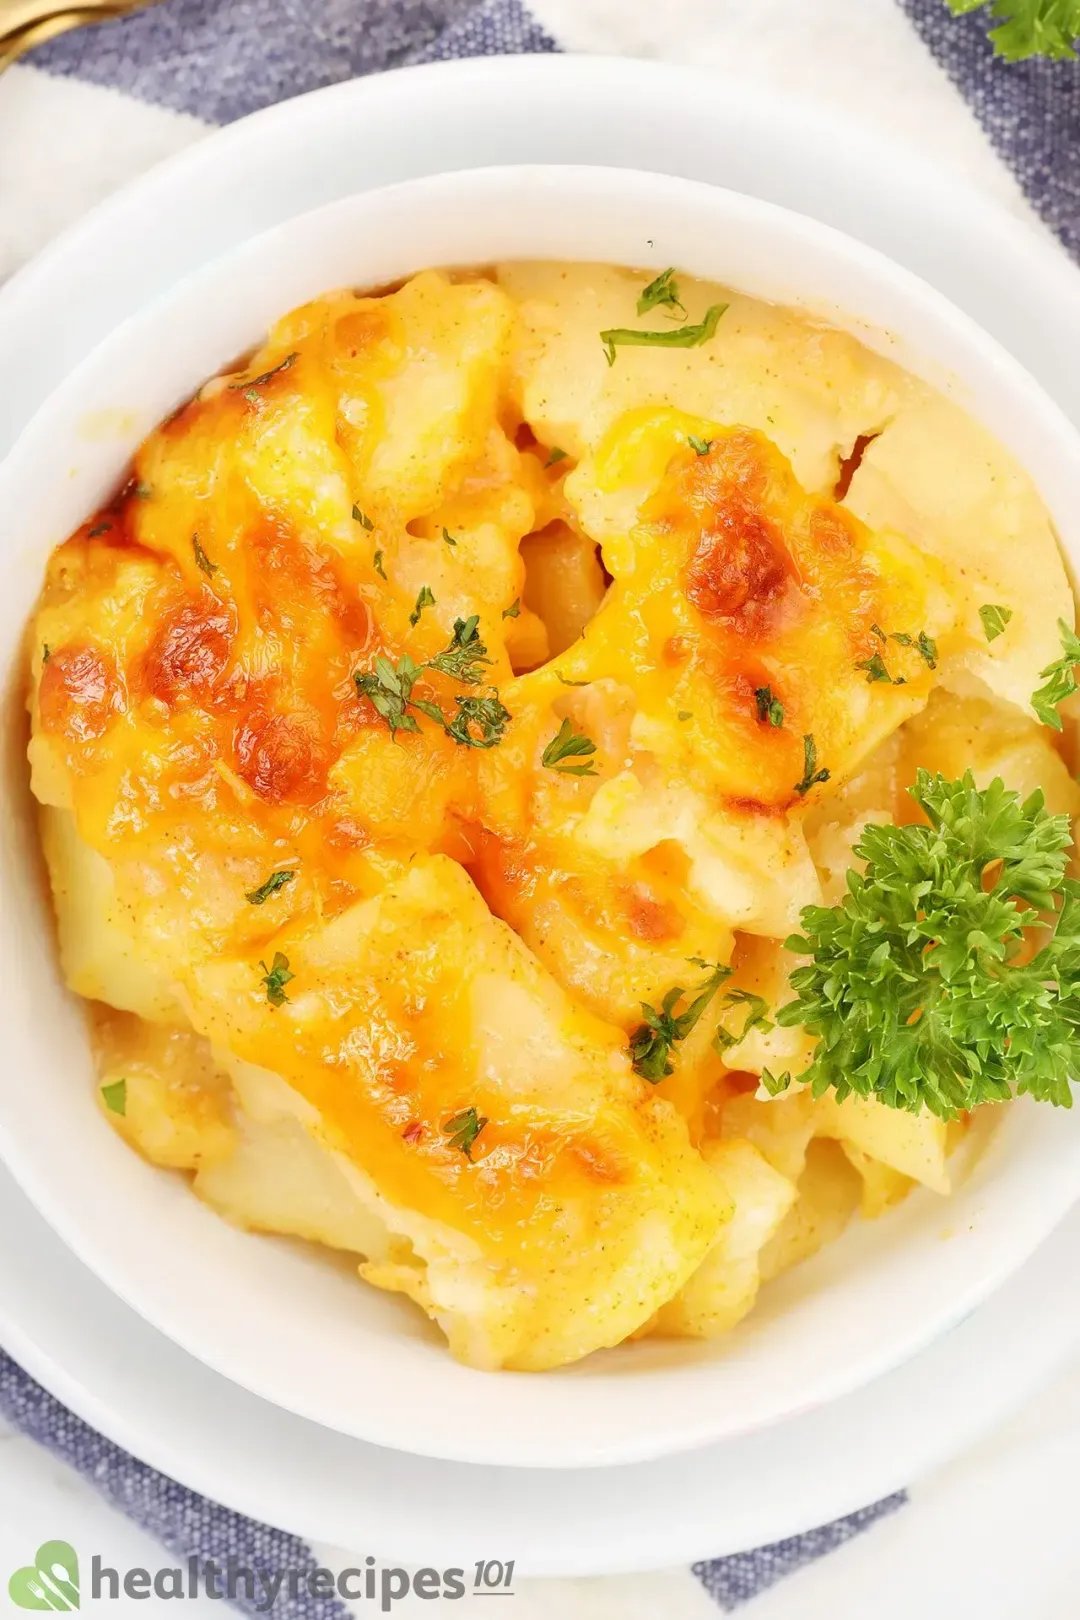 How to Store and Reheat Leftover Scalloped Potatoes